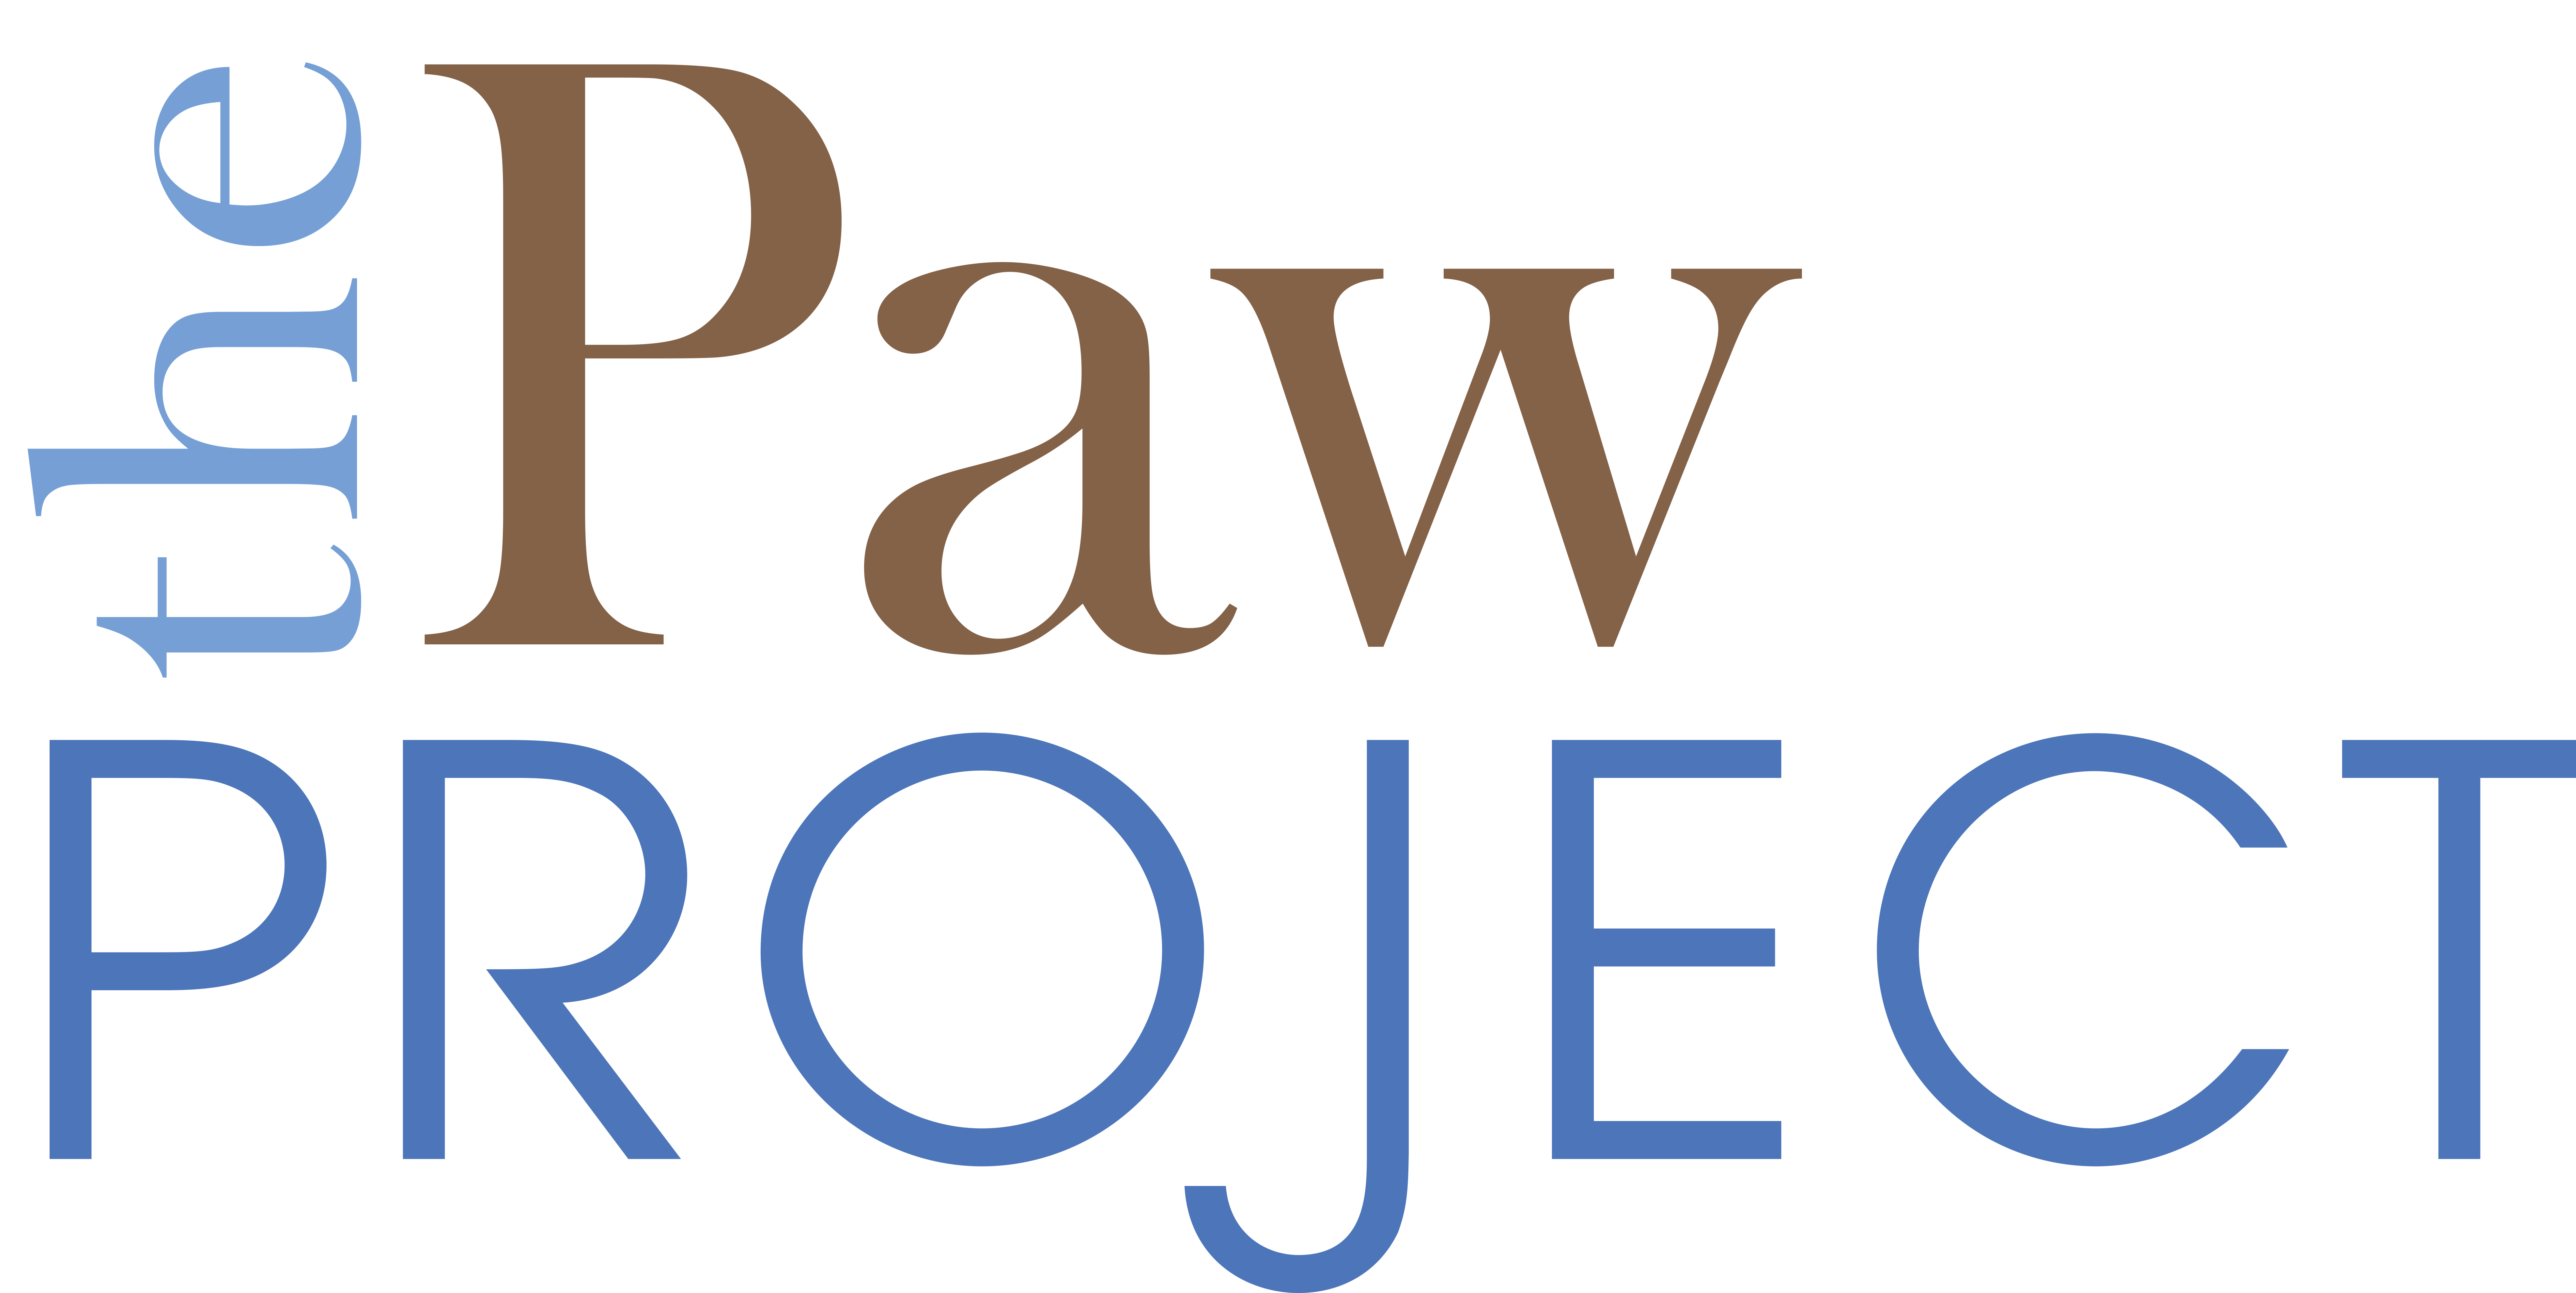 Support legislation to ban declawing cats